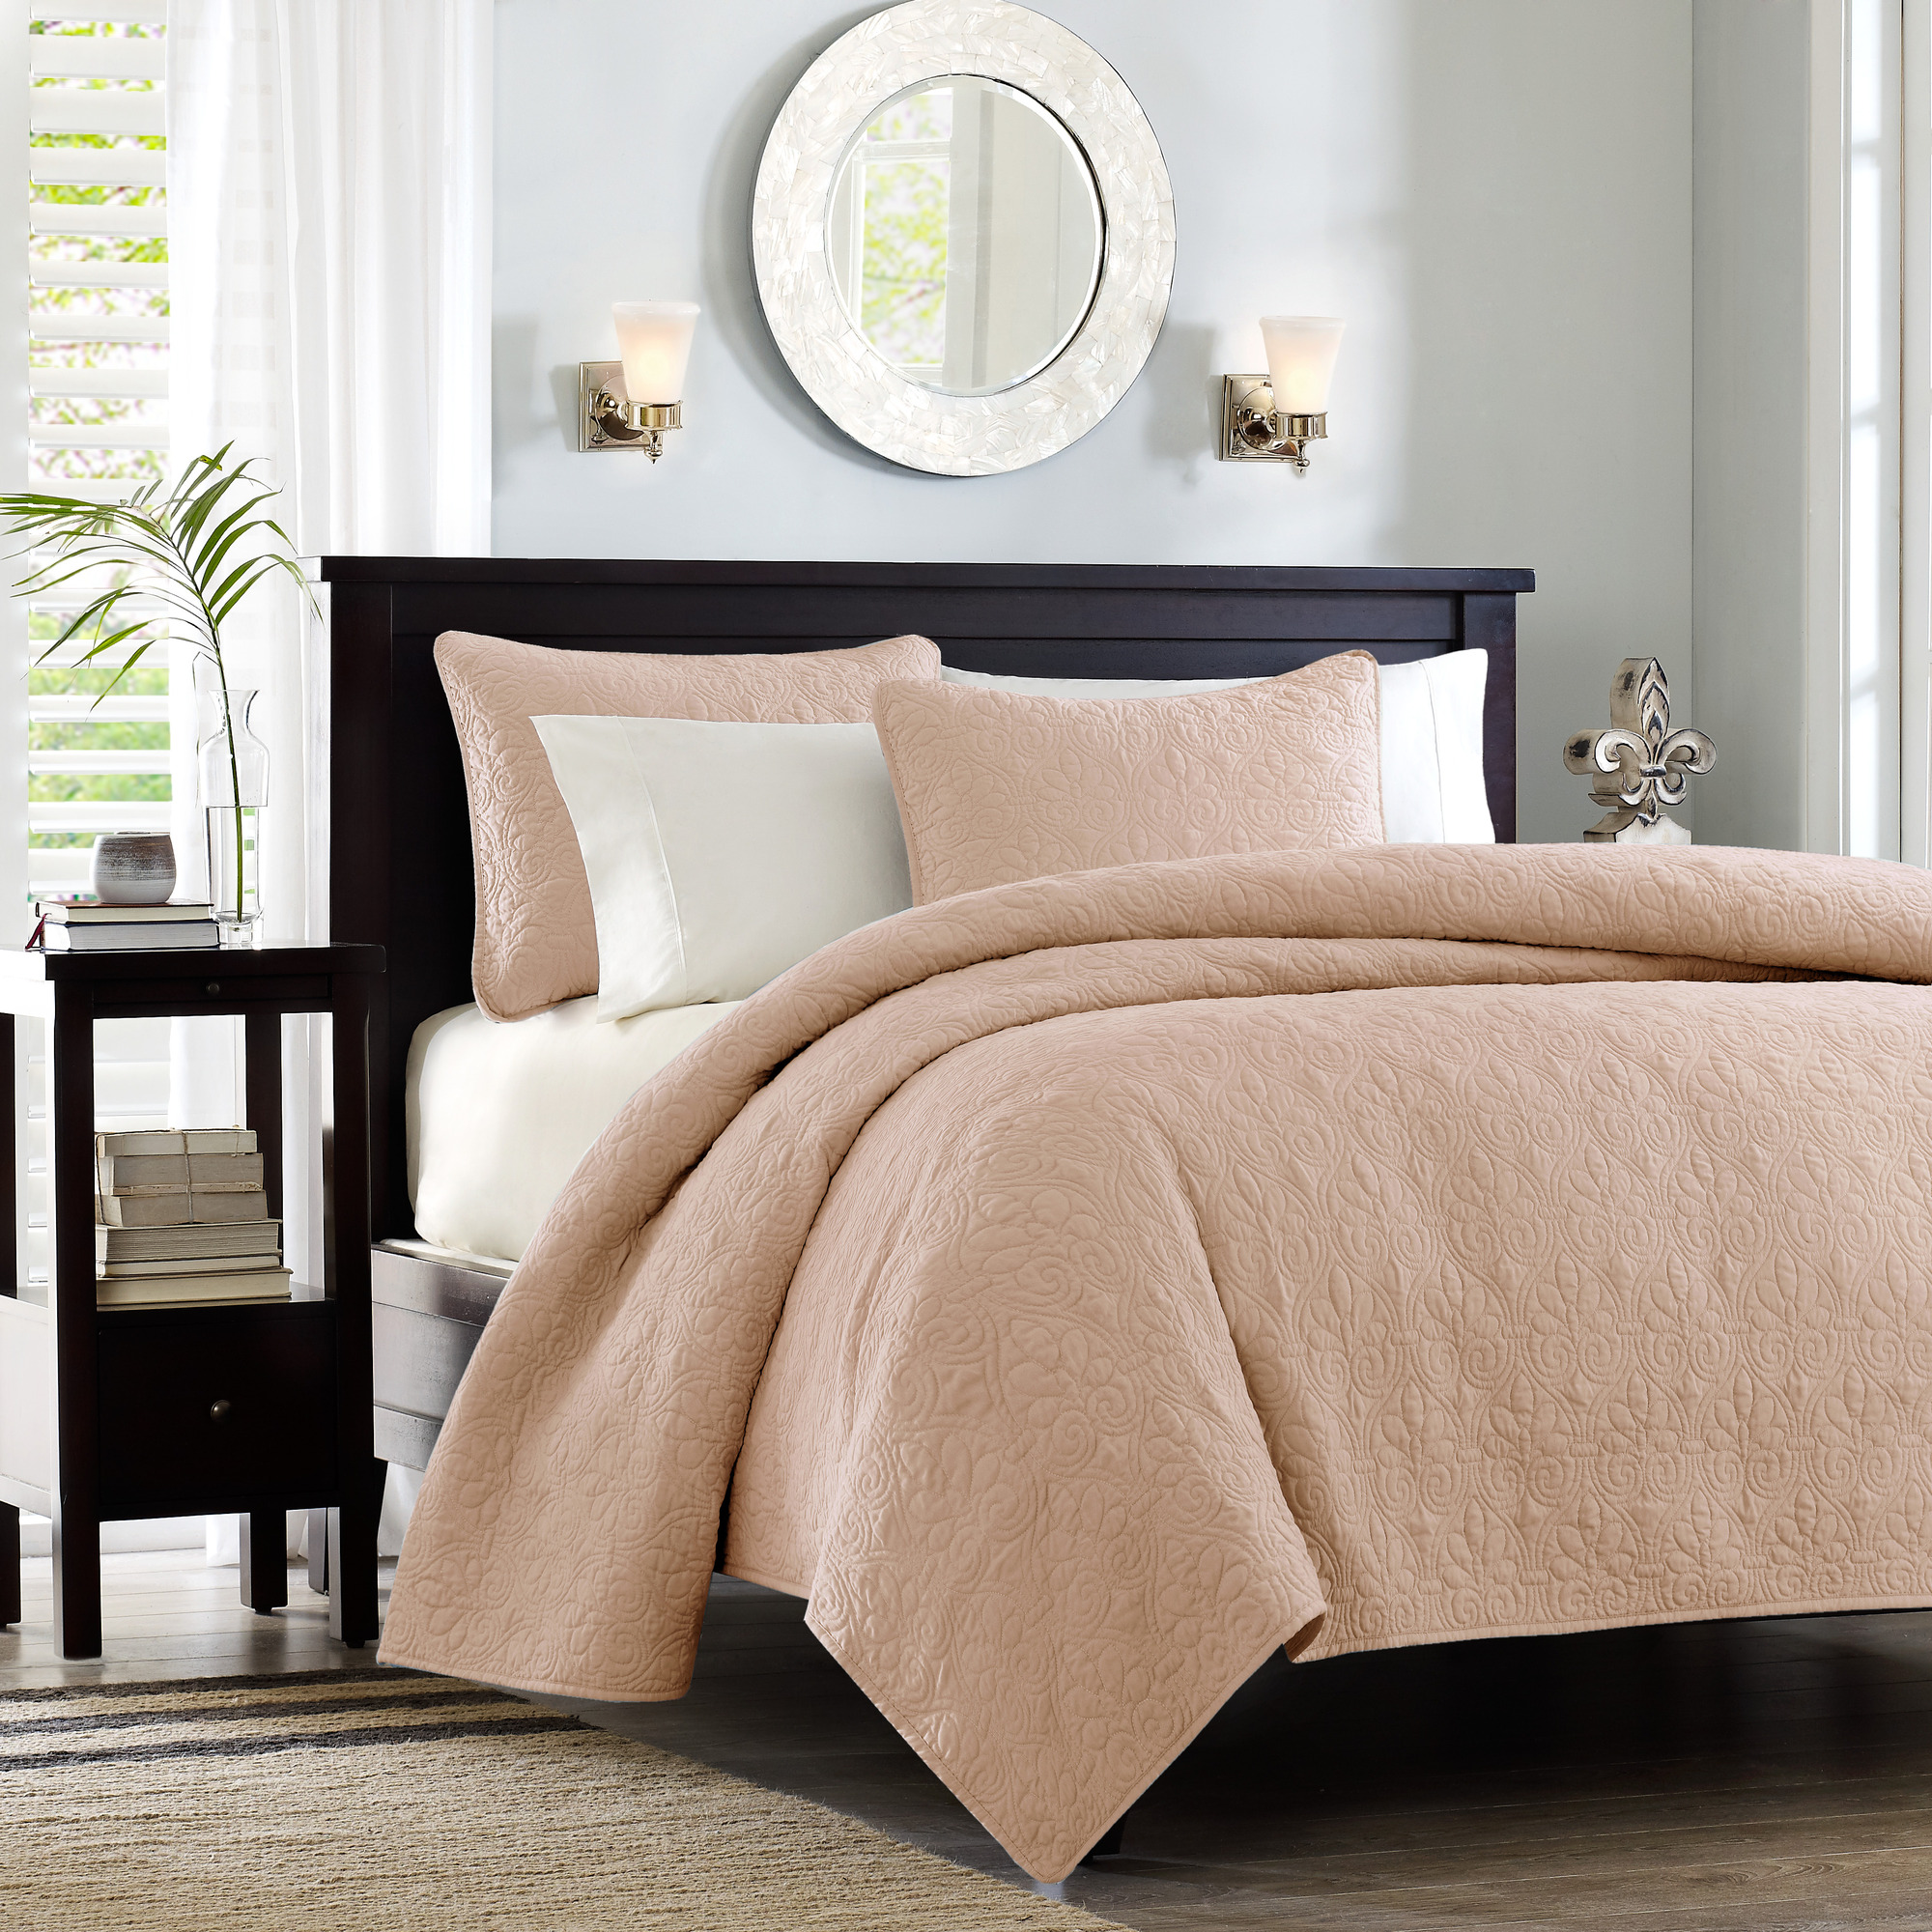 Home Essence Vancouver Super Soft Reversible Coverlet Set, Full/Queen, Blush - image 1 of 14